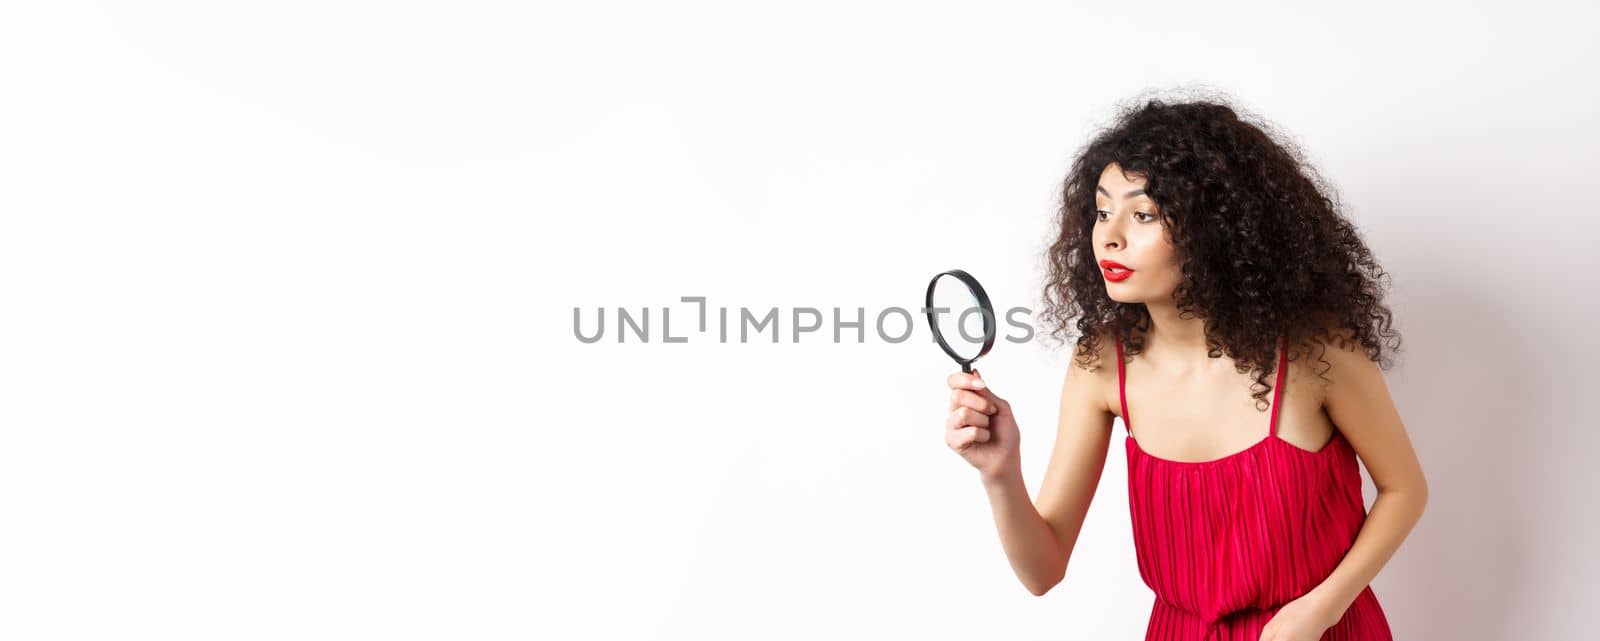 Beautiful woman in red dress searching for something, looking aside through magnifying glass, standing against white background.